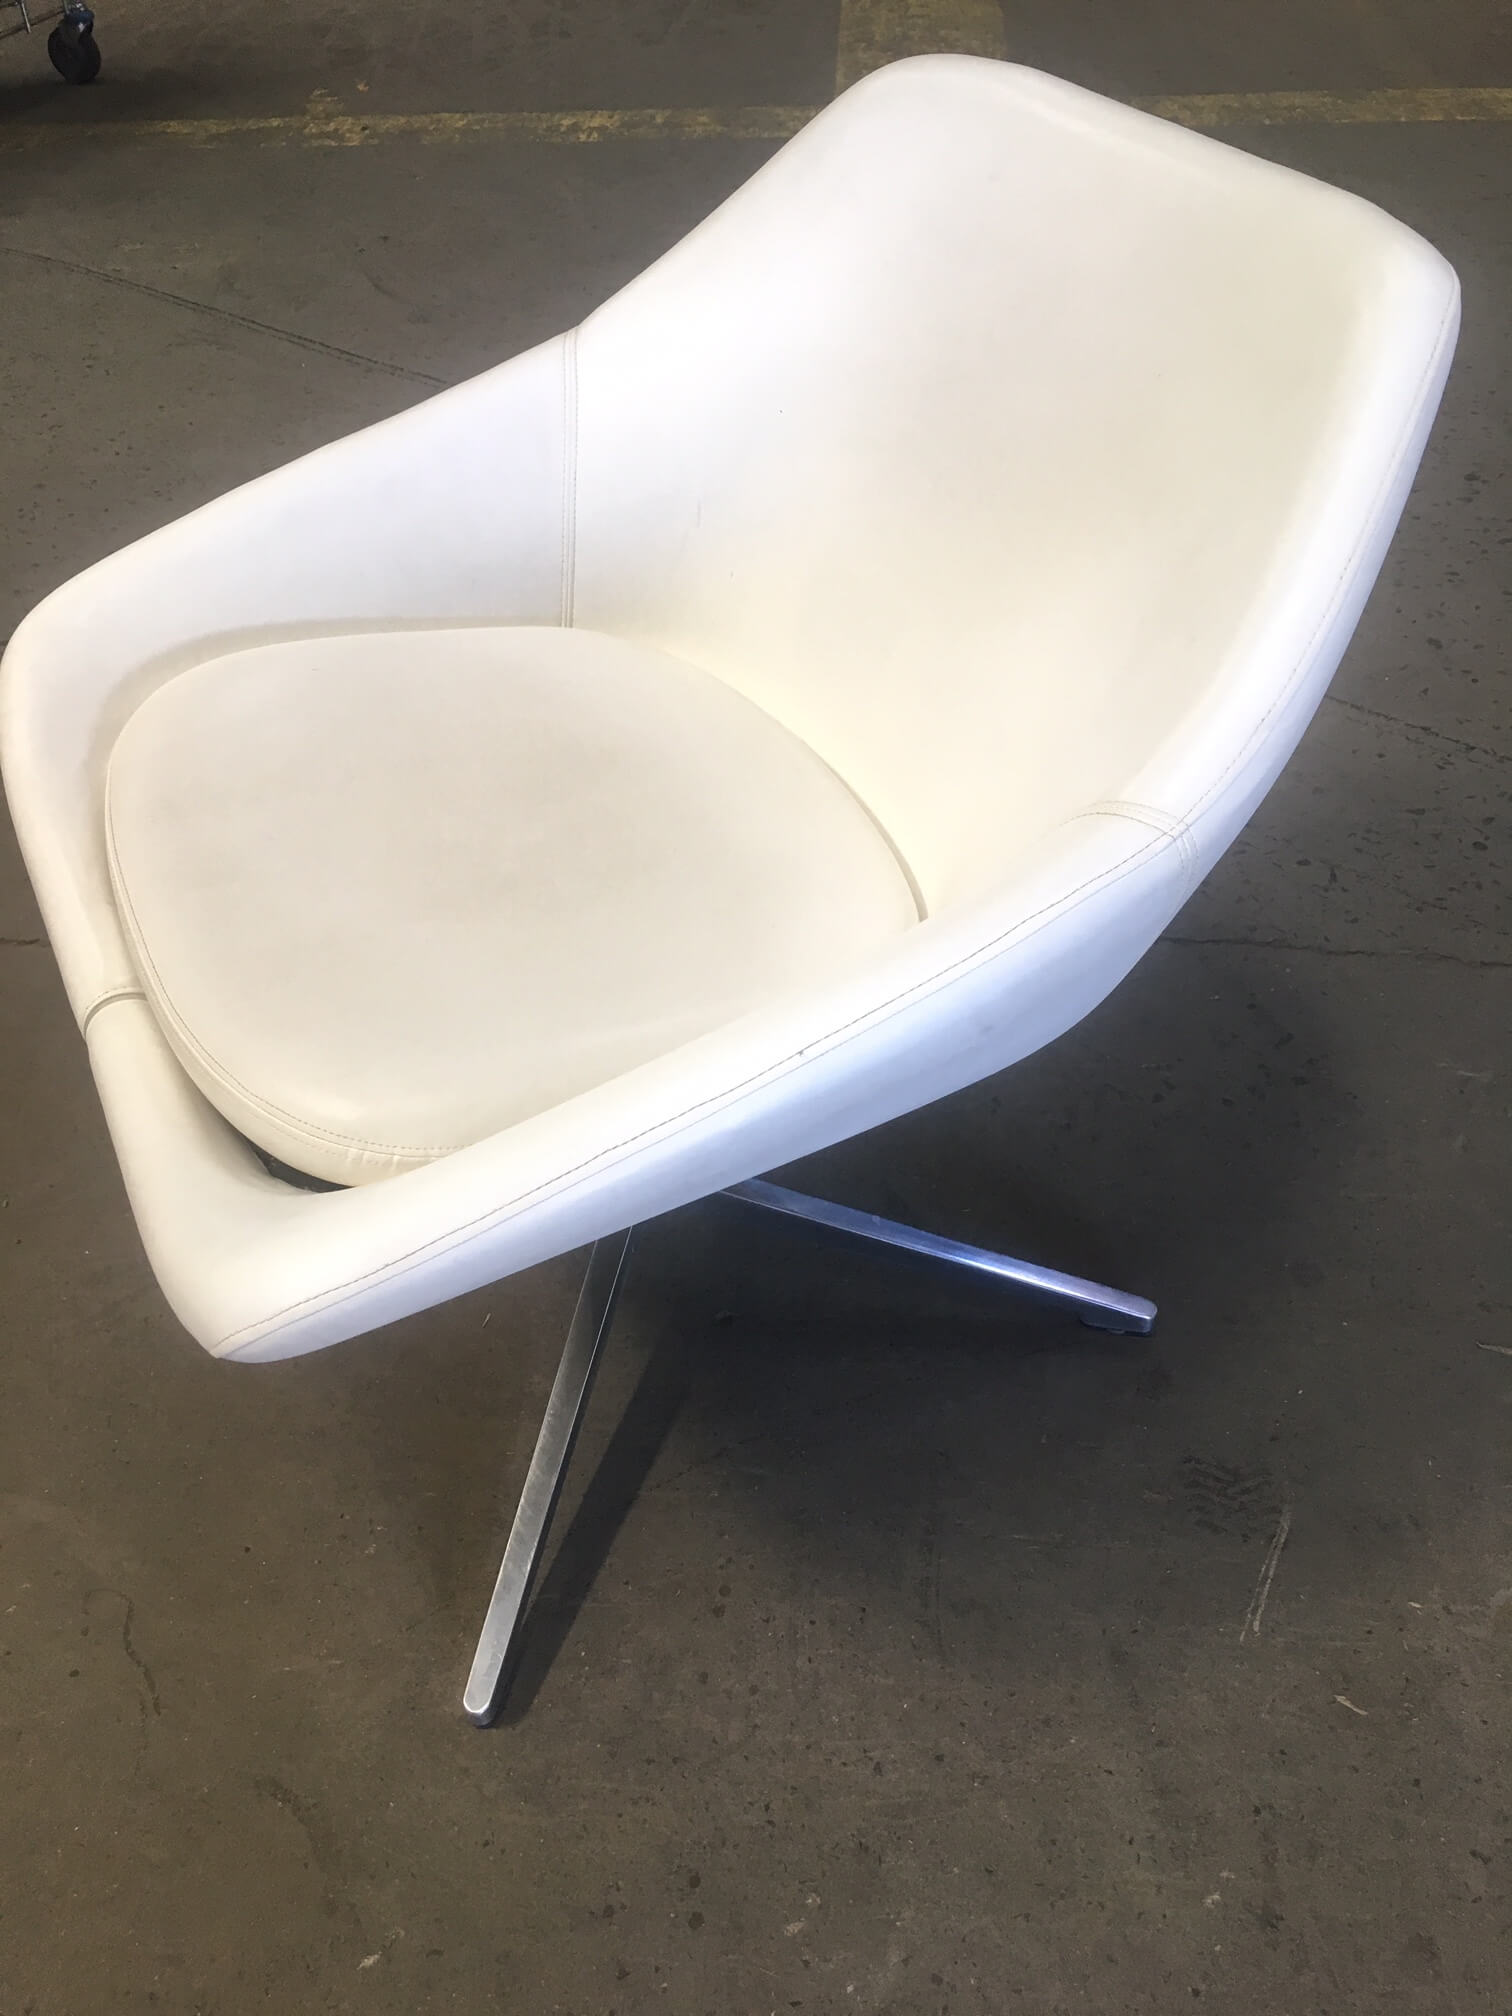 Used Office Chairs For Sale - Allermiur Reception Chairs - Used Office Furniture For Sale